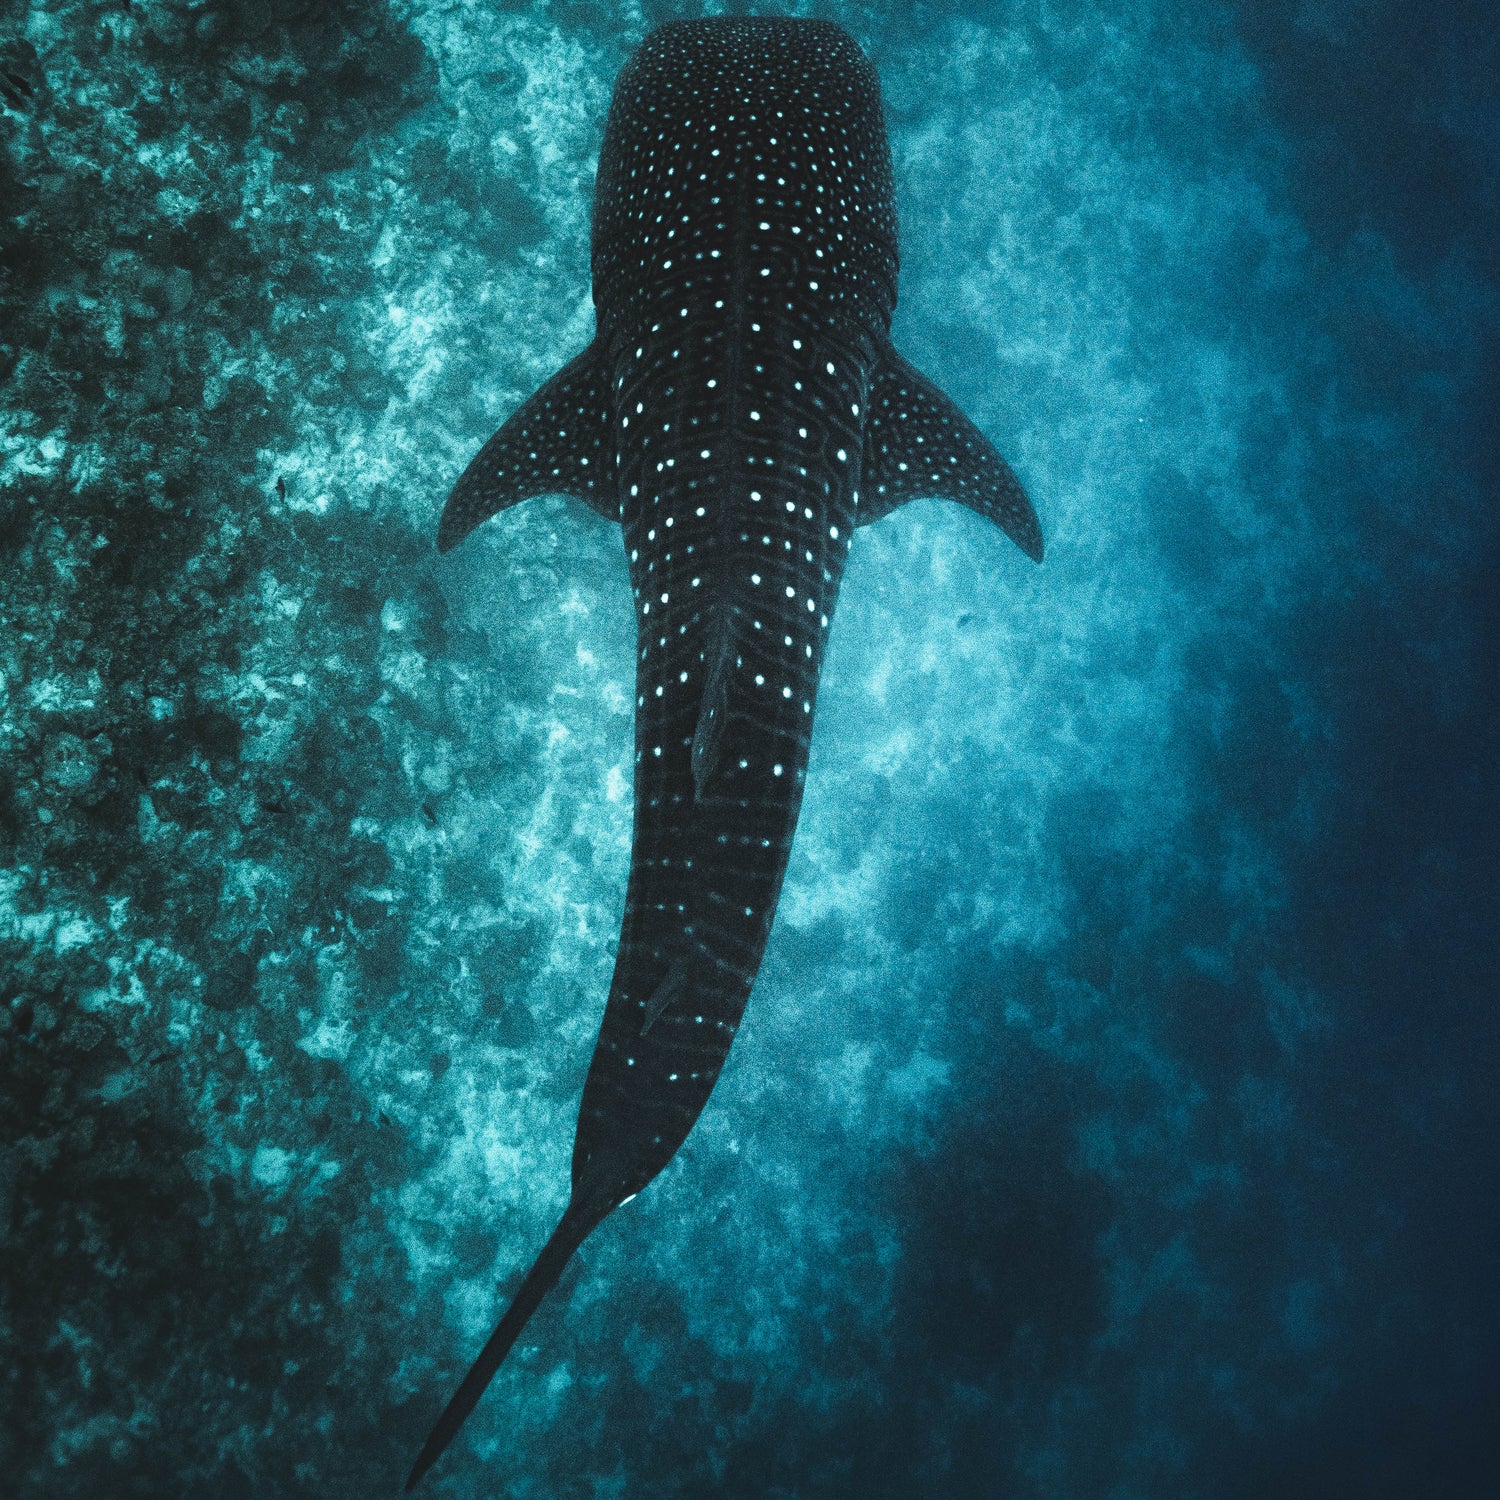 whale shark pictured from above - Connected Clothing Company donates 10% to Mission Blue ocean conservation efforts